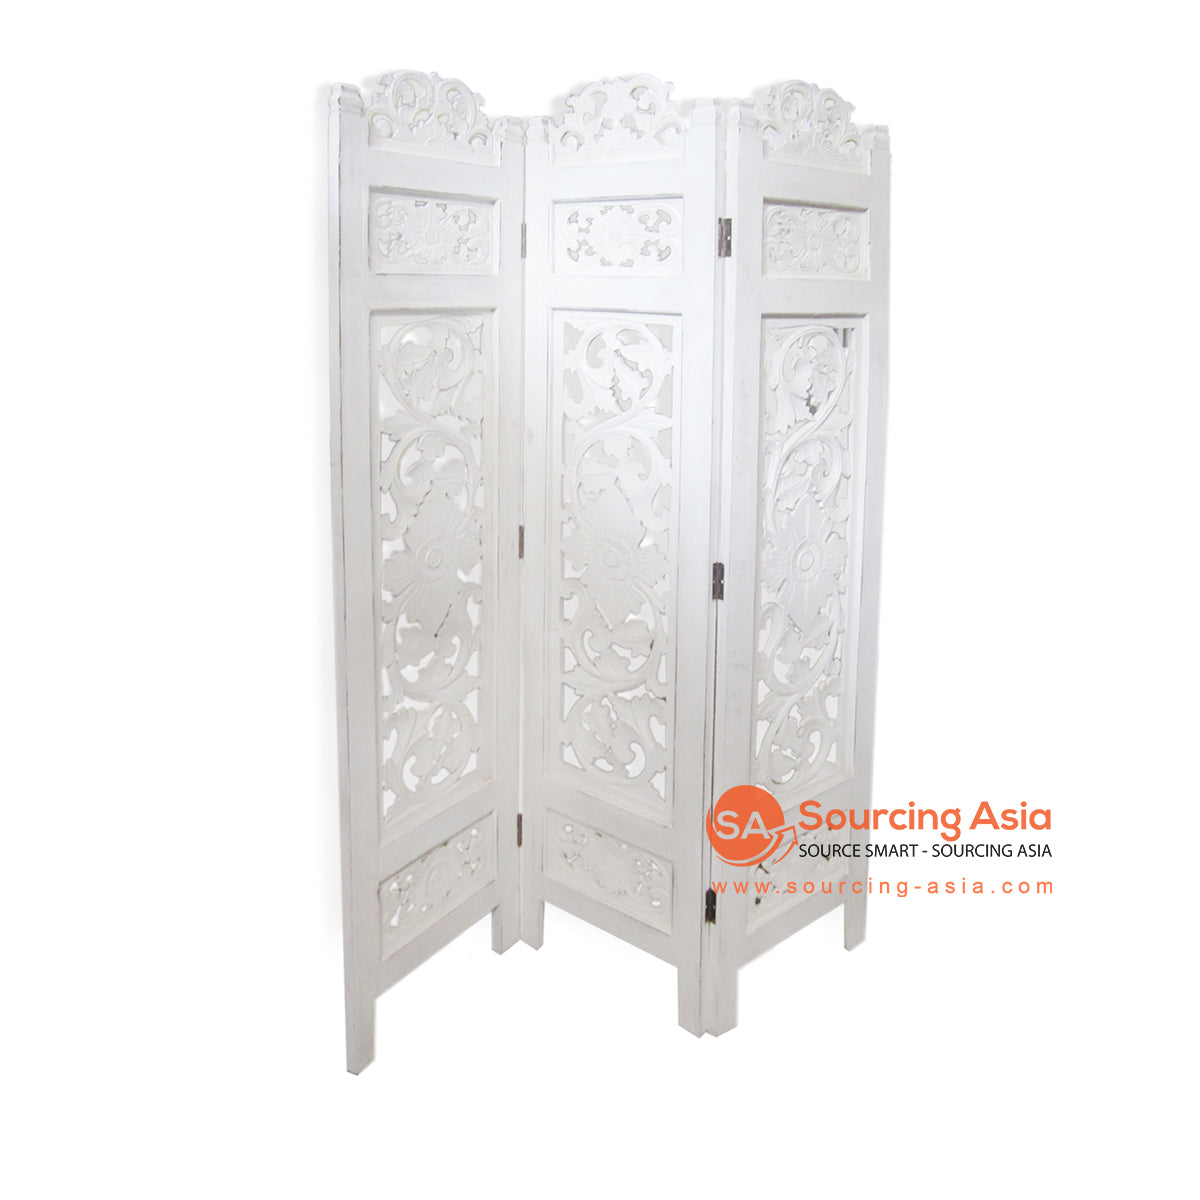 THE131WW WHITE WASH WOODEN SCREEN WITH CARVING